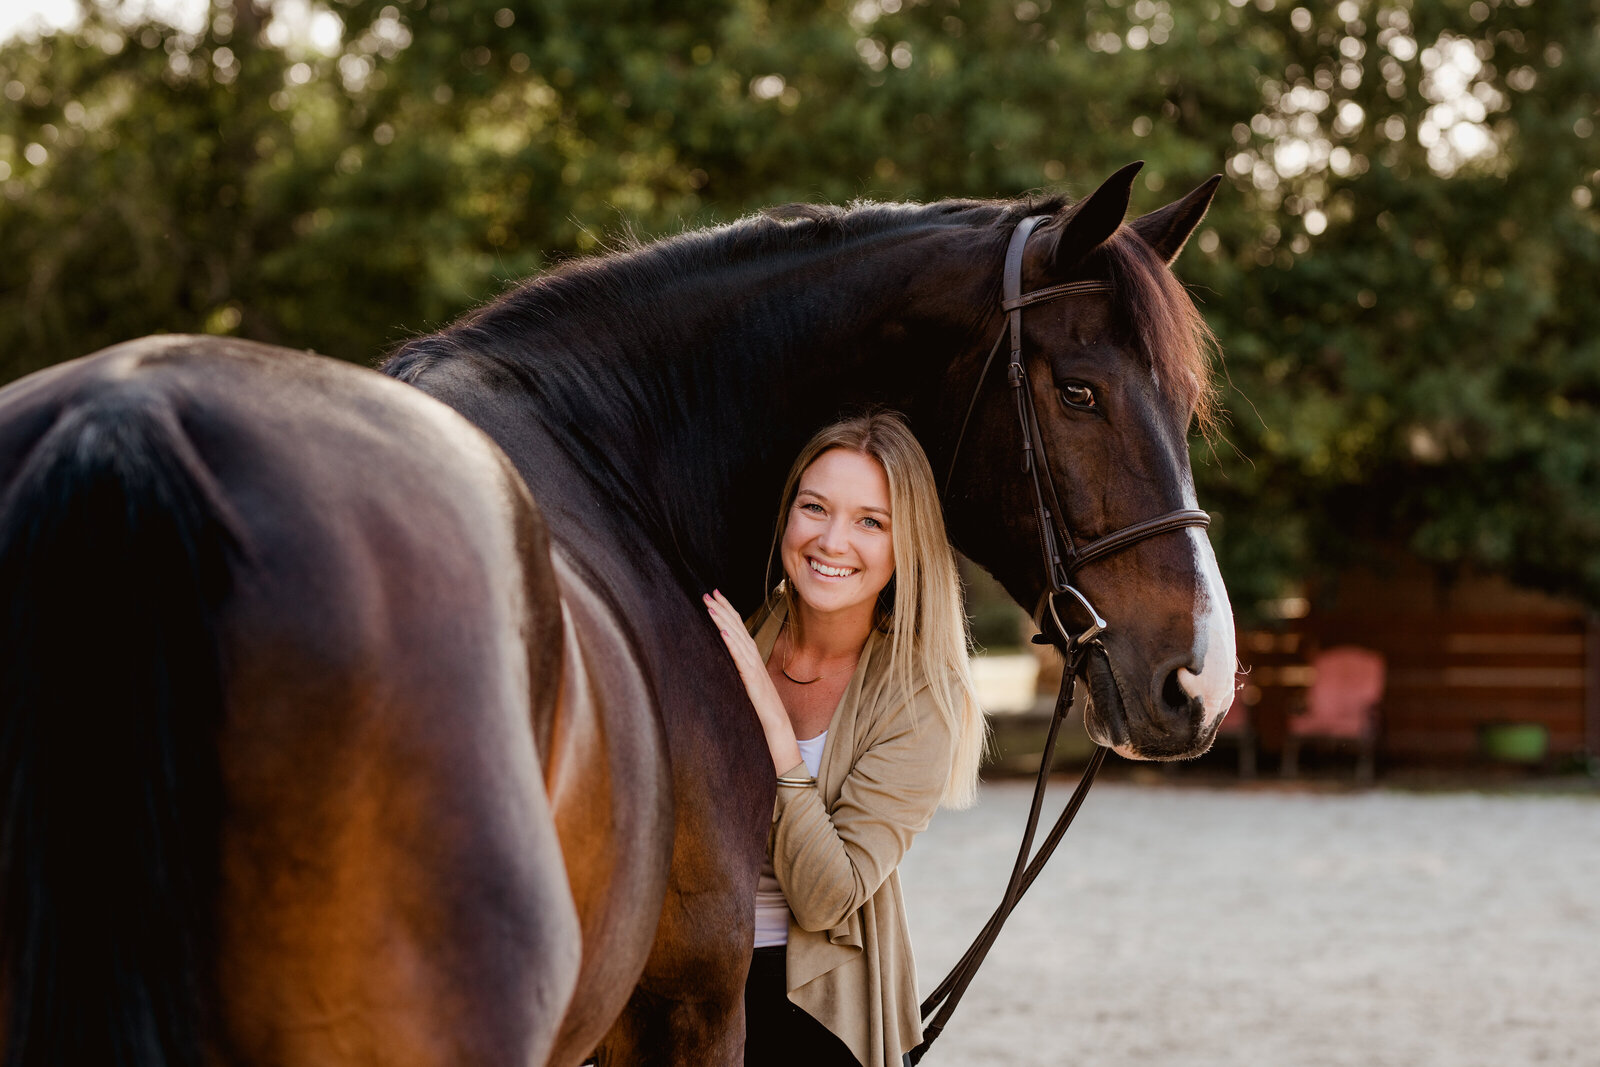 Dressage horse photography in Florida capturing the bond between horse and rider.